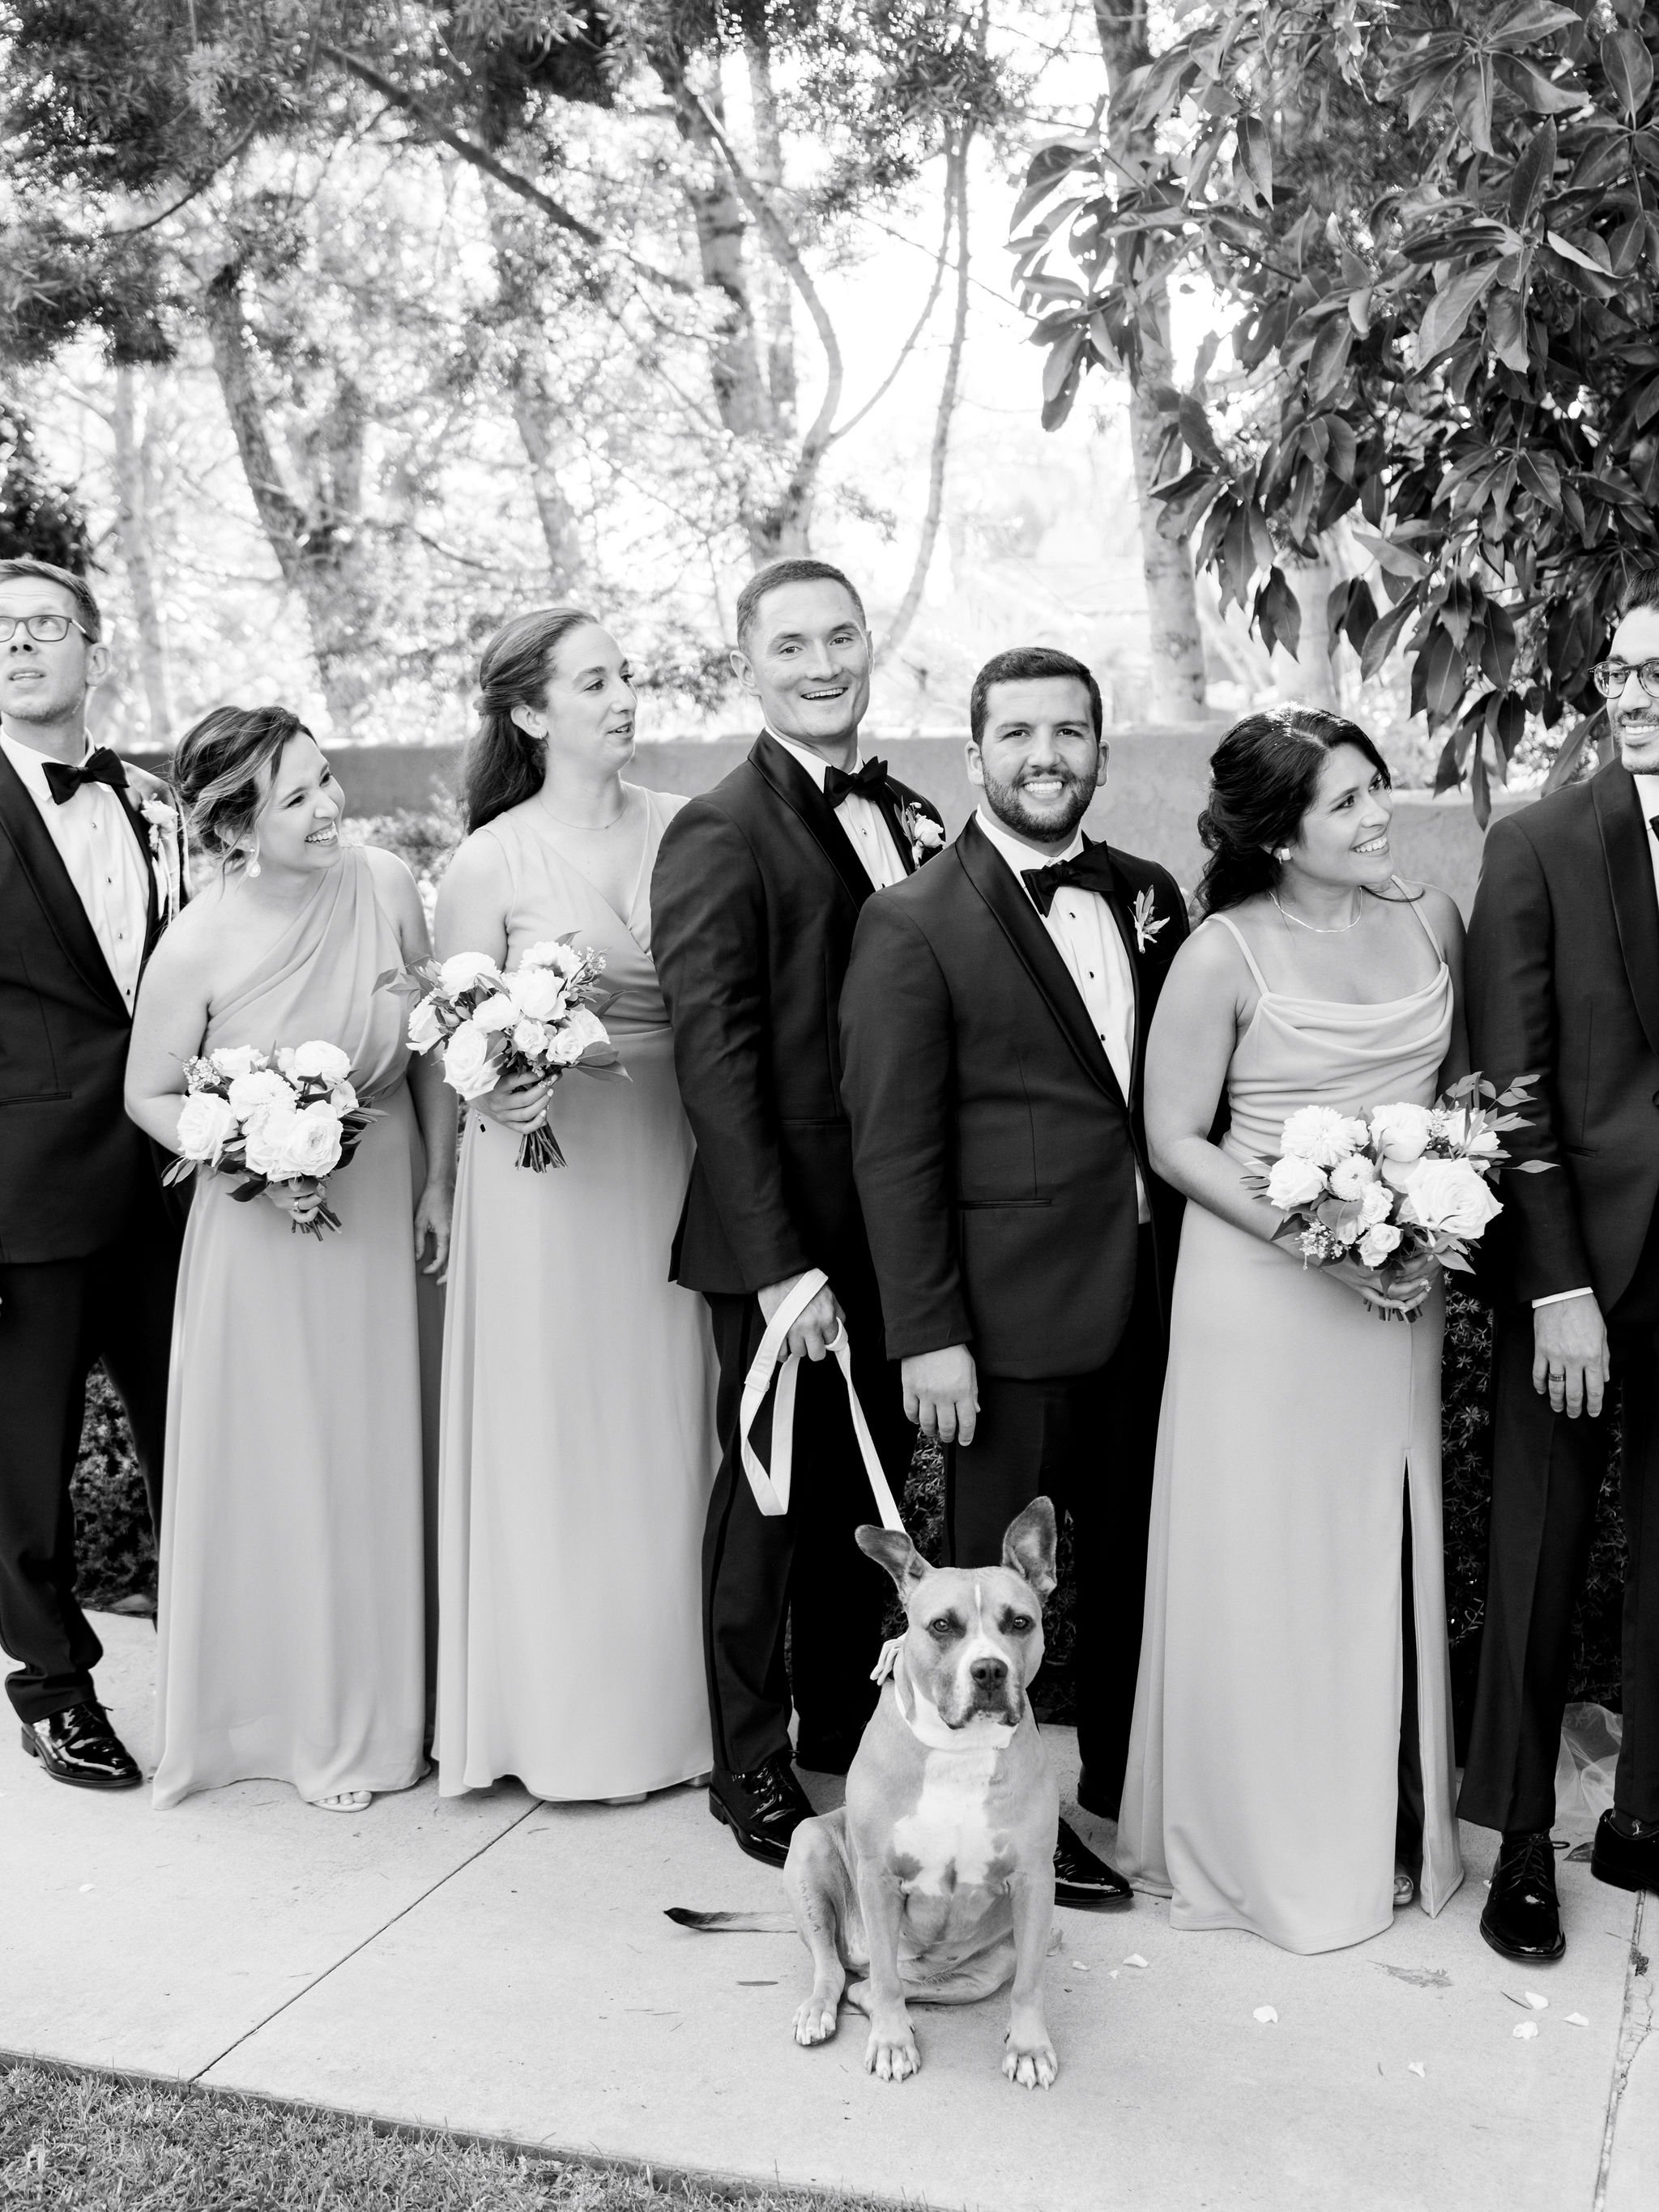 wedding party with dog.jpg